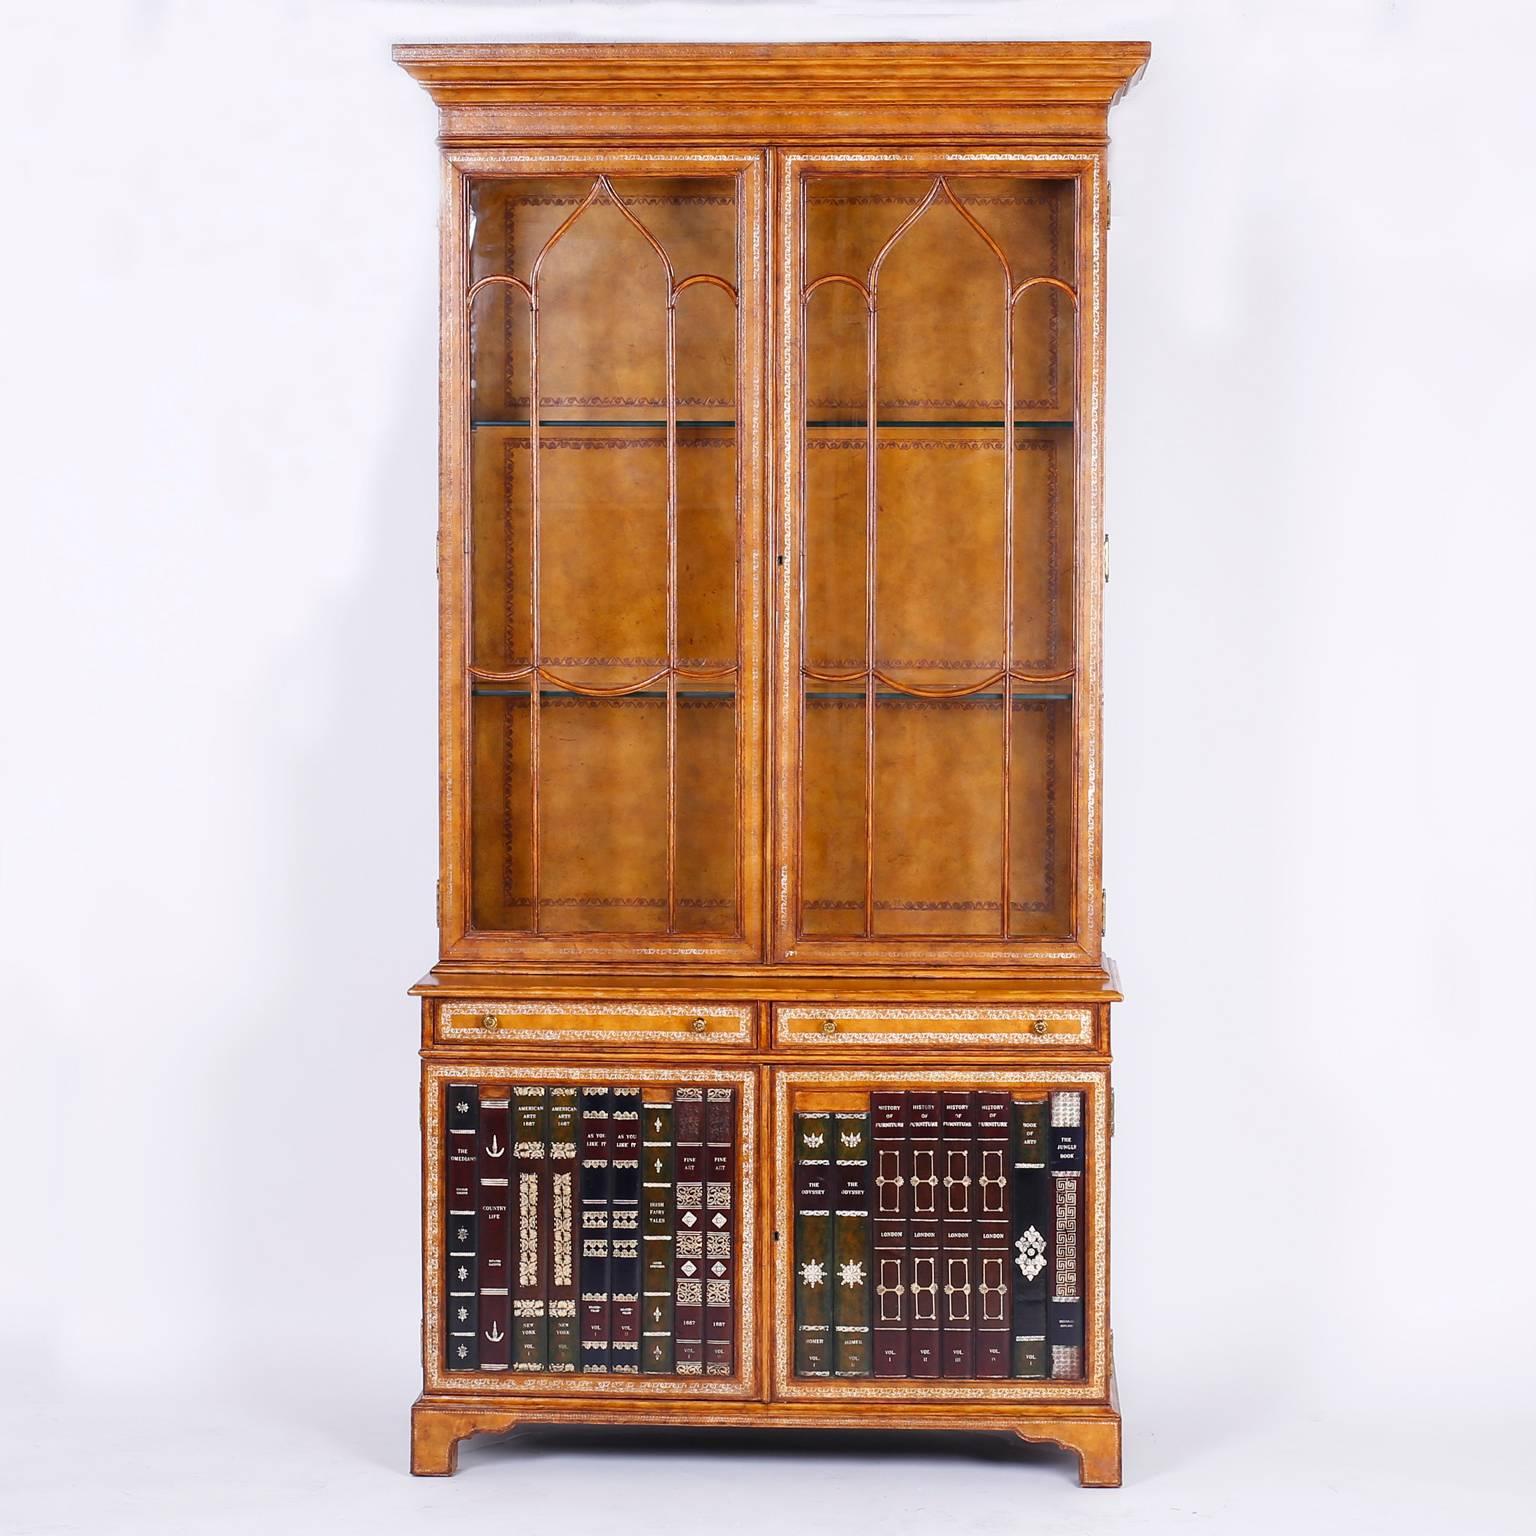 Tall, stately, and serious cabinet or bookcase entirely clan in tooled tan leather. Having two glass lockable doors in the top case and featuring faux leather books on the lower case doors. Signed Maitland-Smith in a drawer lined with marbleized